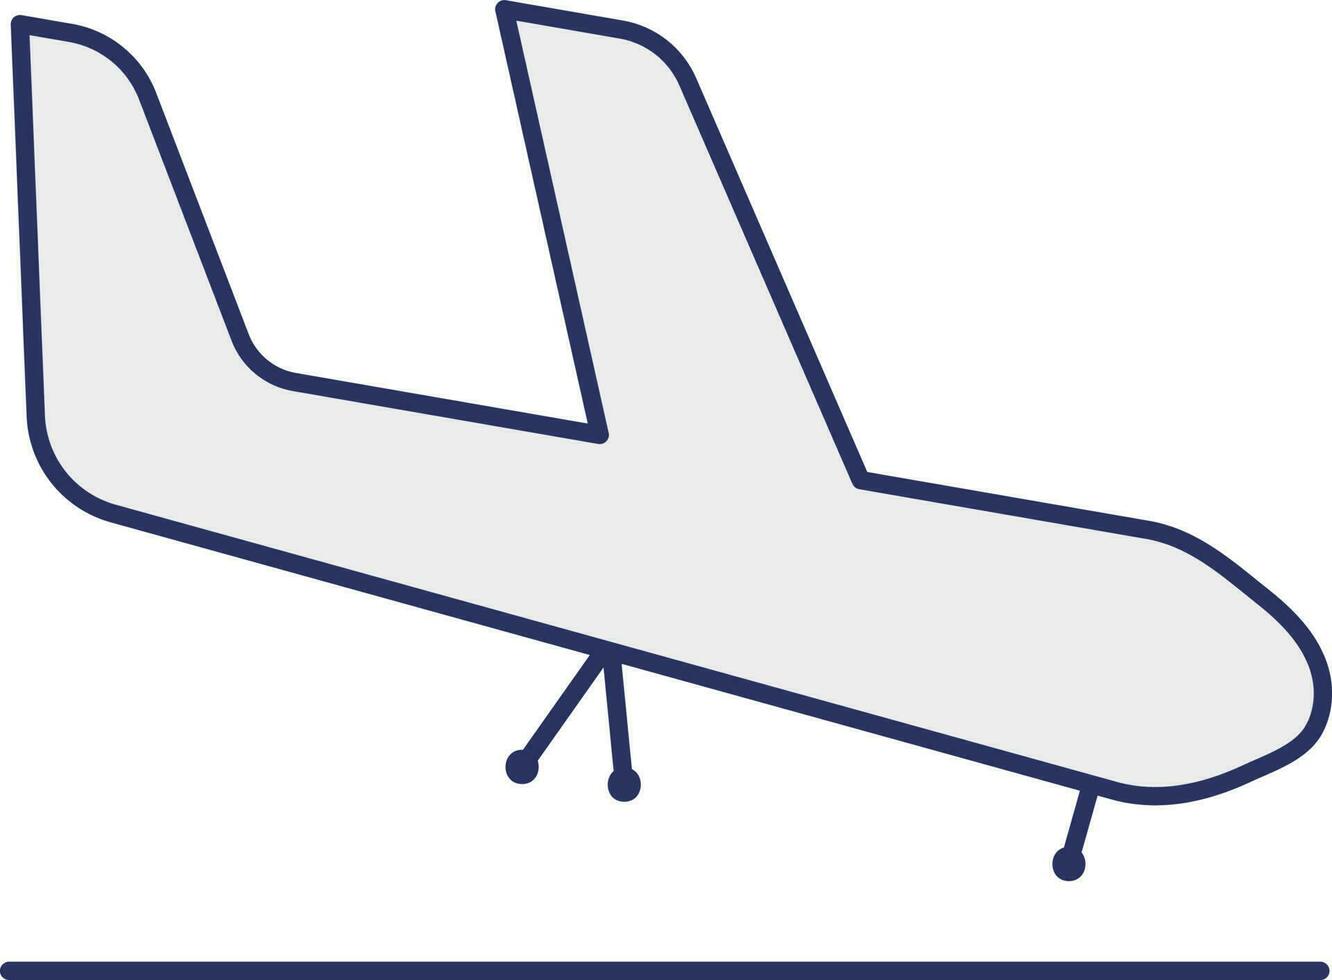 Blue Outline Illustration Of Airplane Icon. vector